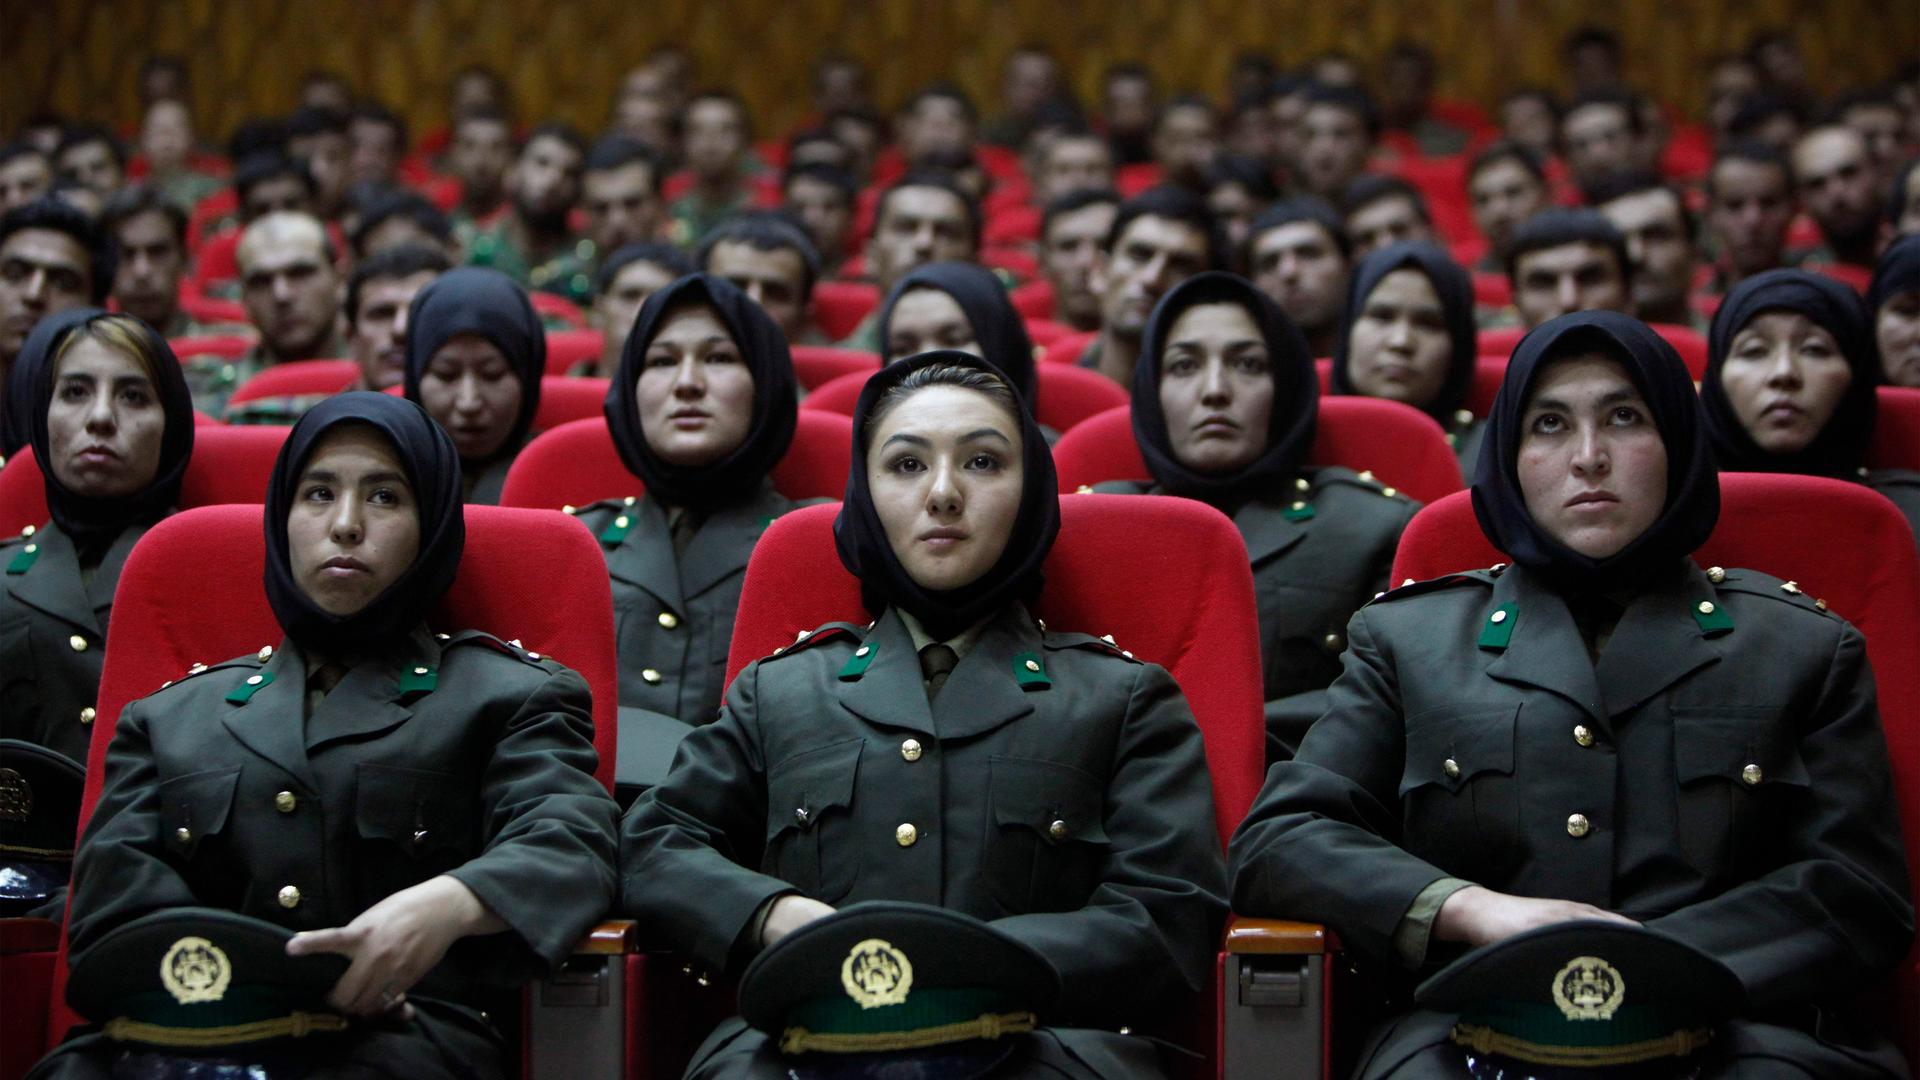 Newly trained female officers from the Afghan National Army sit in front seats as a new batch of officers attend their graduation ceremony at National Army's training center in Kabul on Sept. 23, 2010. 